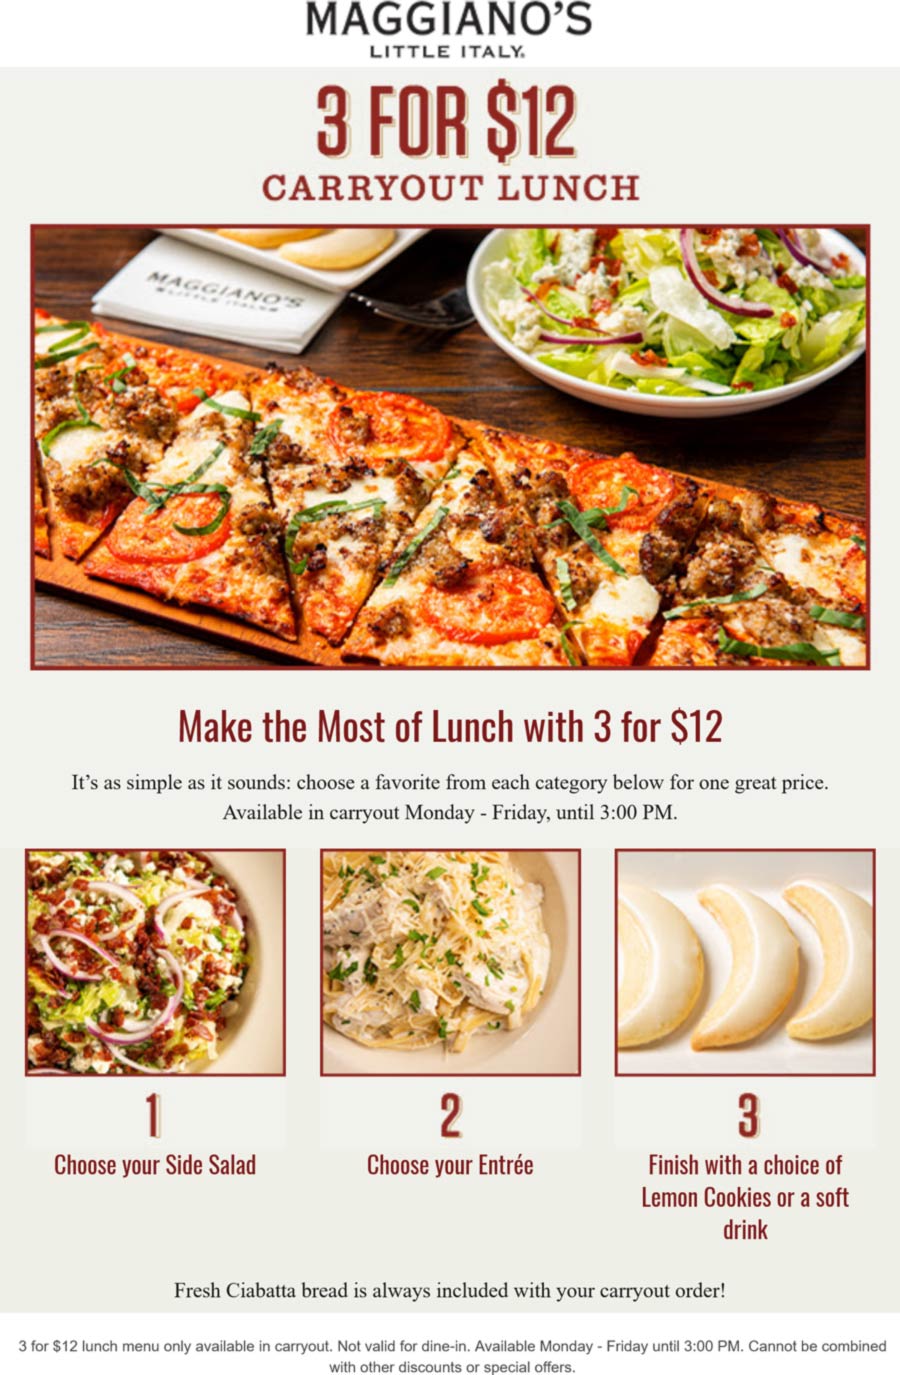 Maggianos Little Italy restaurants Coupon  3 for $12 carryout until 3p lunch menu at Maggianos Little Italy restaurants #maggianoslittleitaly 